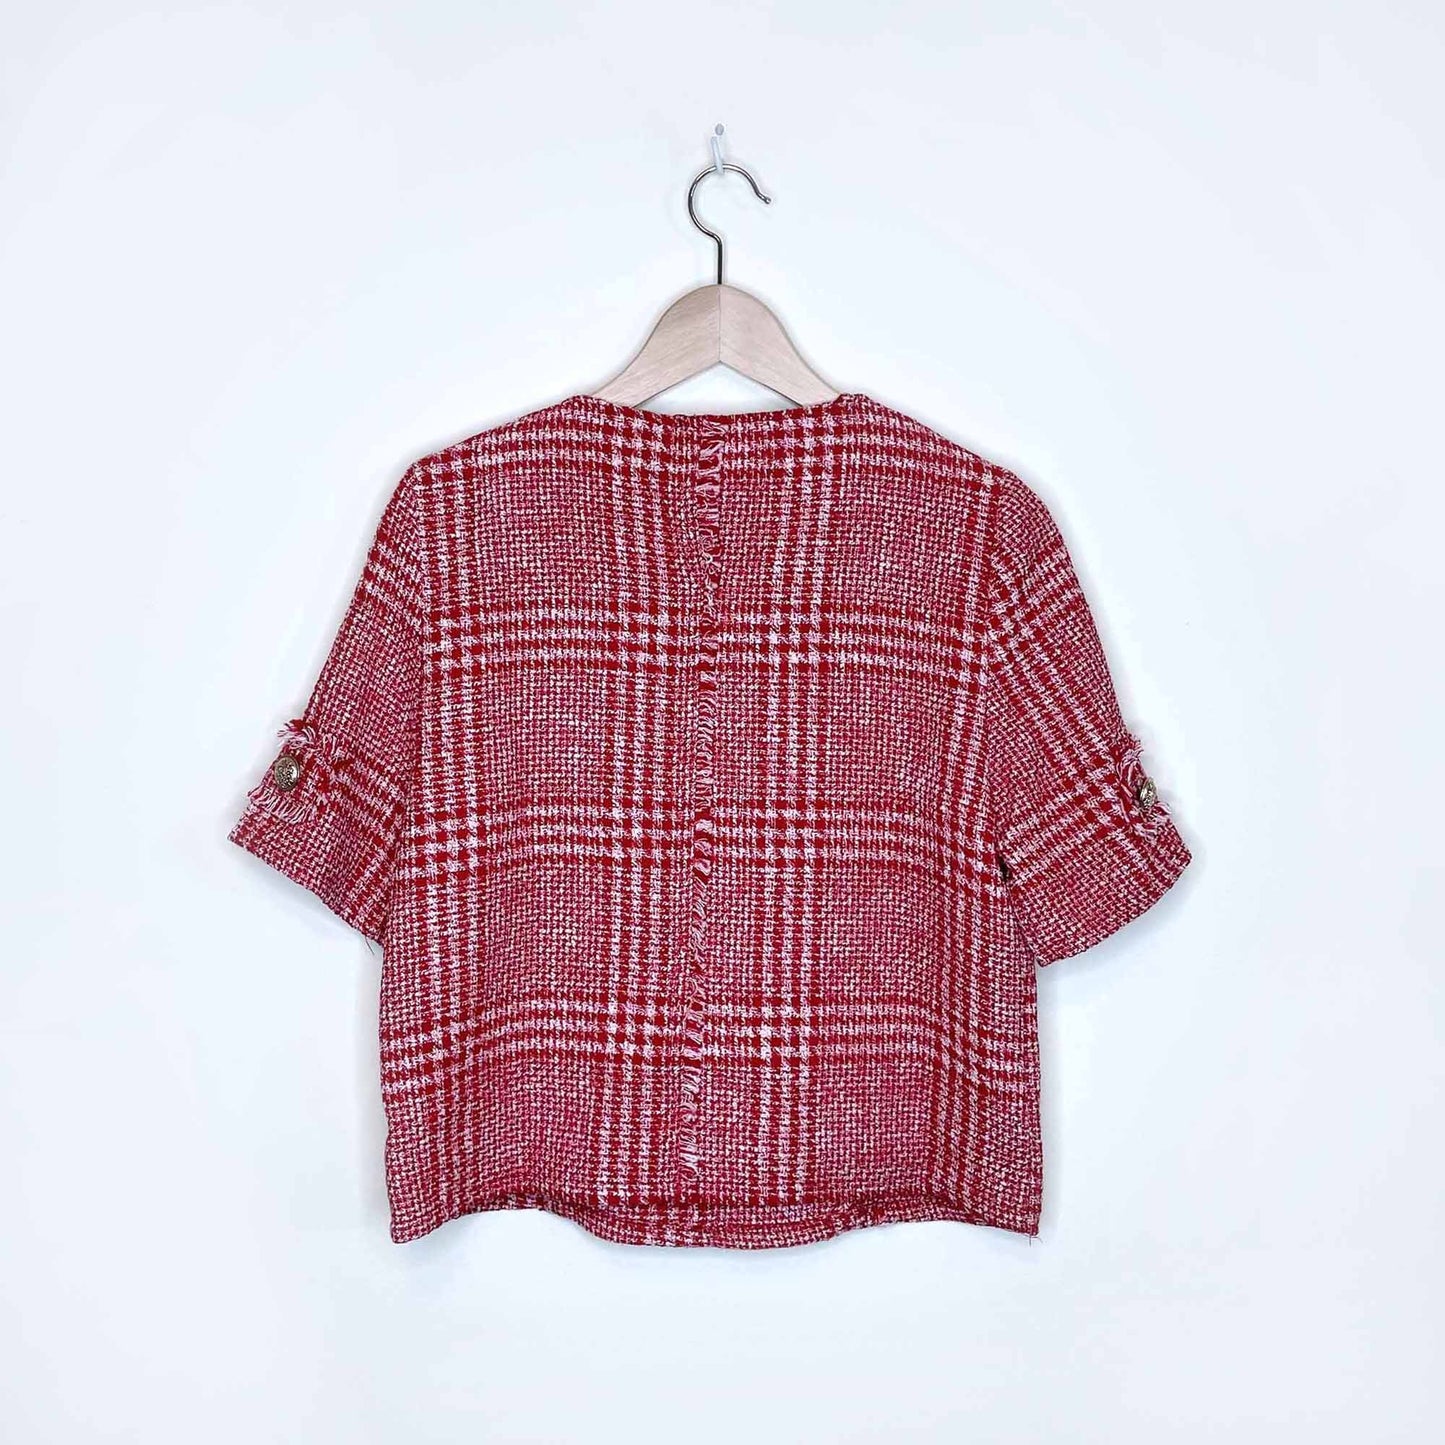 zara trf red tweed short sleeve fringe top with gold buttons - size medium